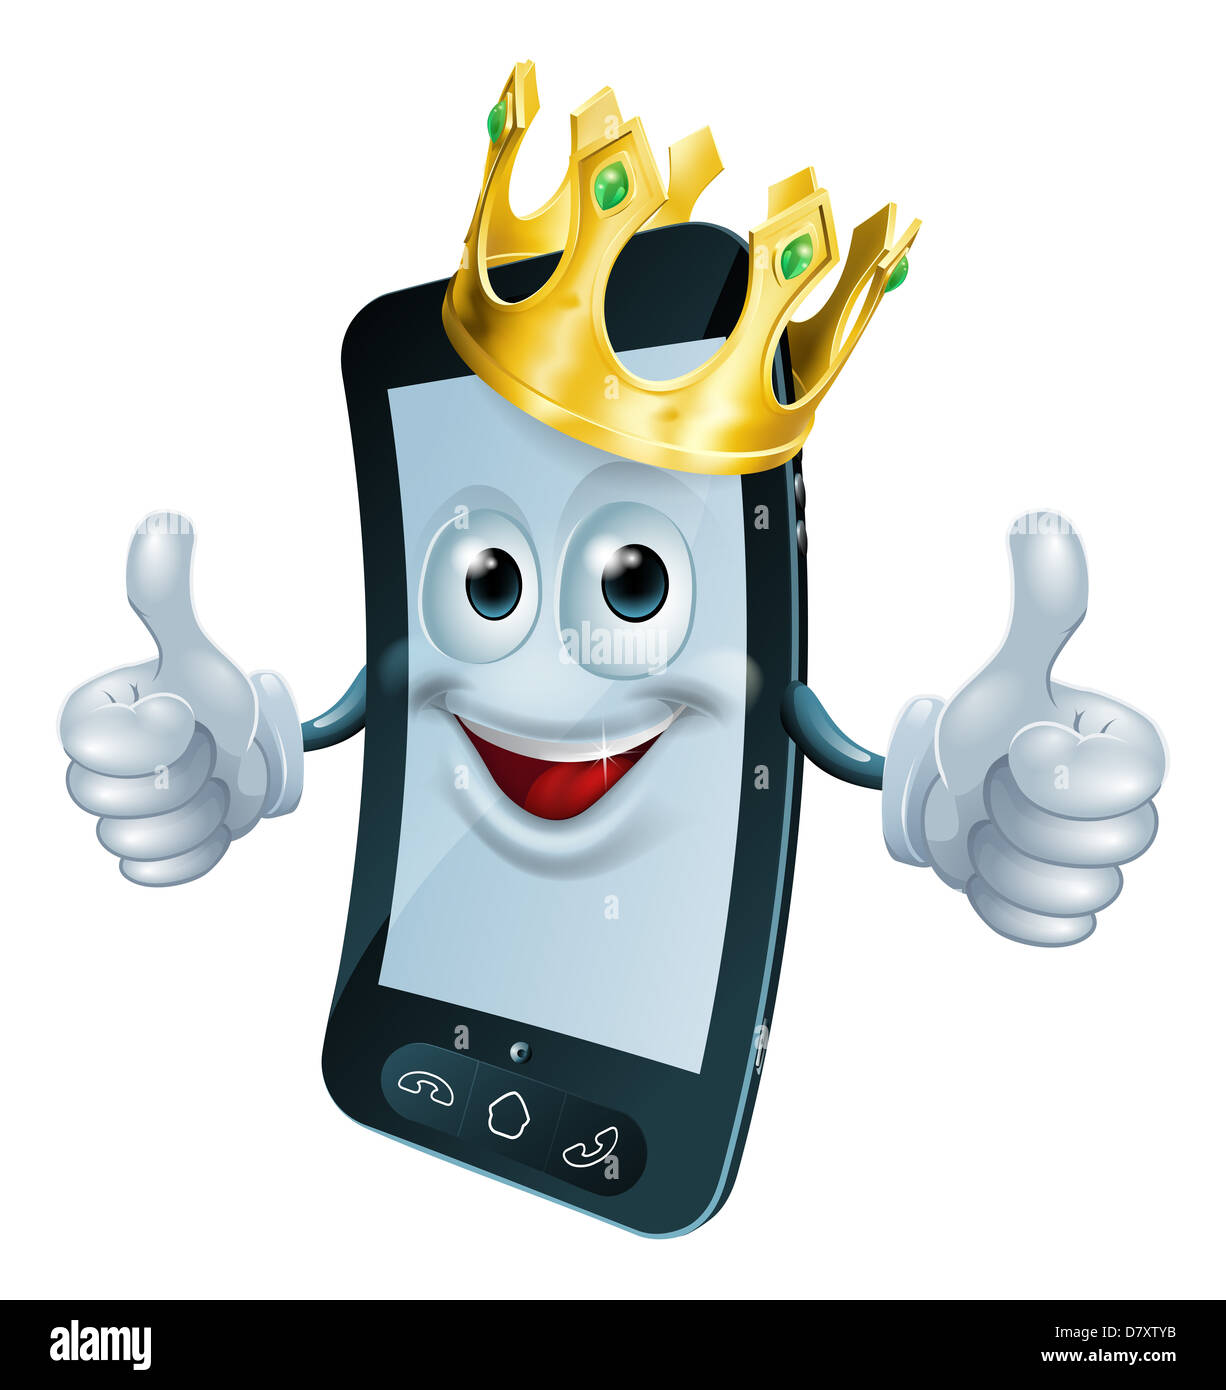 Illustration of a phone mascot man wearing a gold crown and giving a double thumbs up Stock Photo